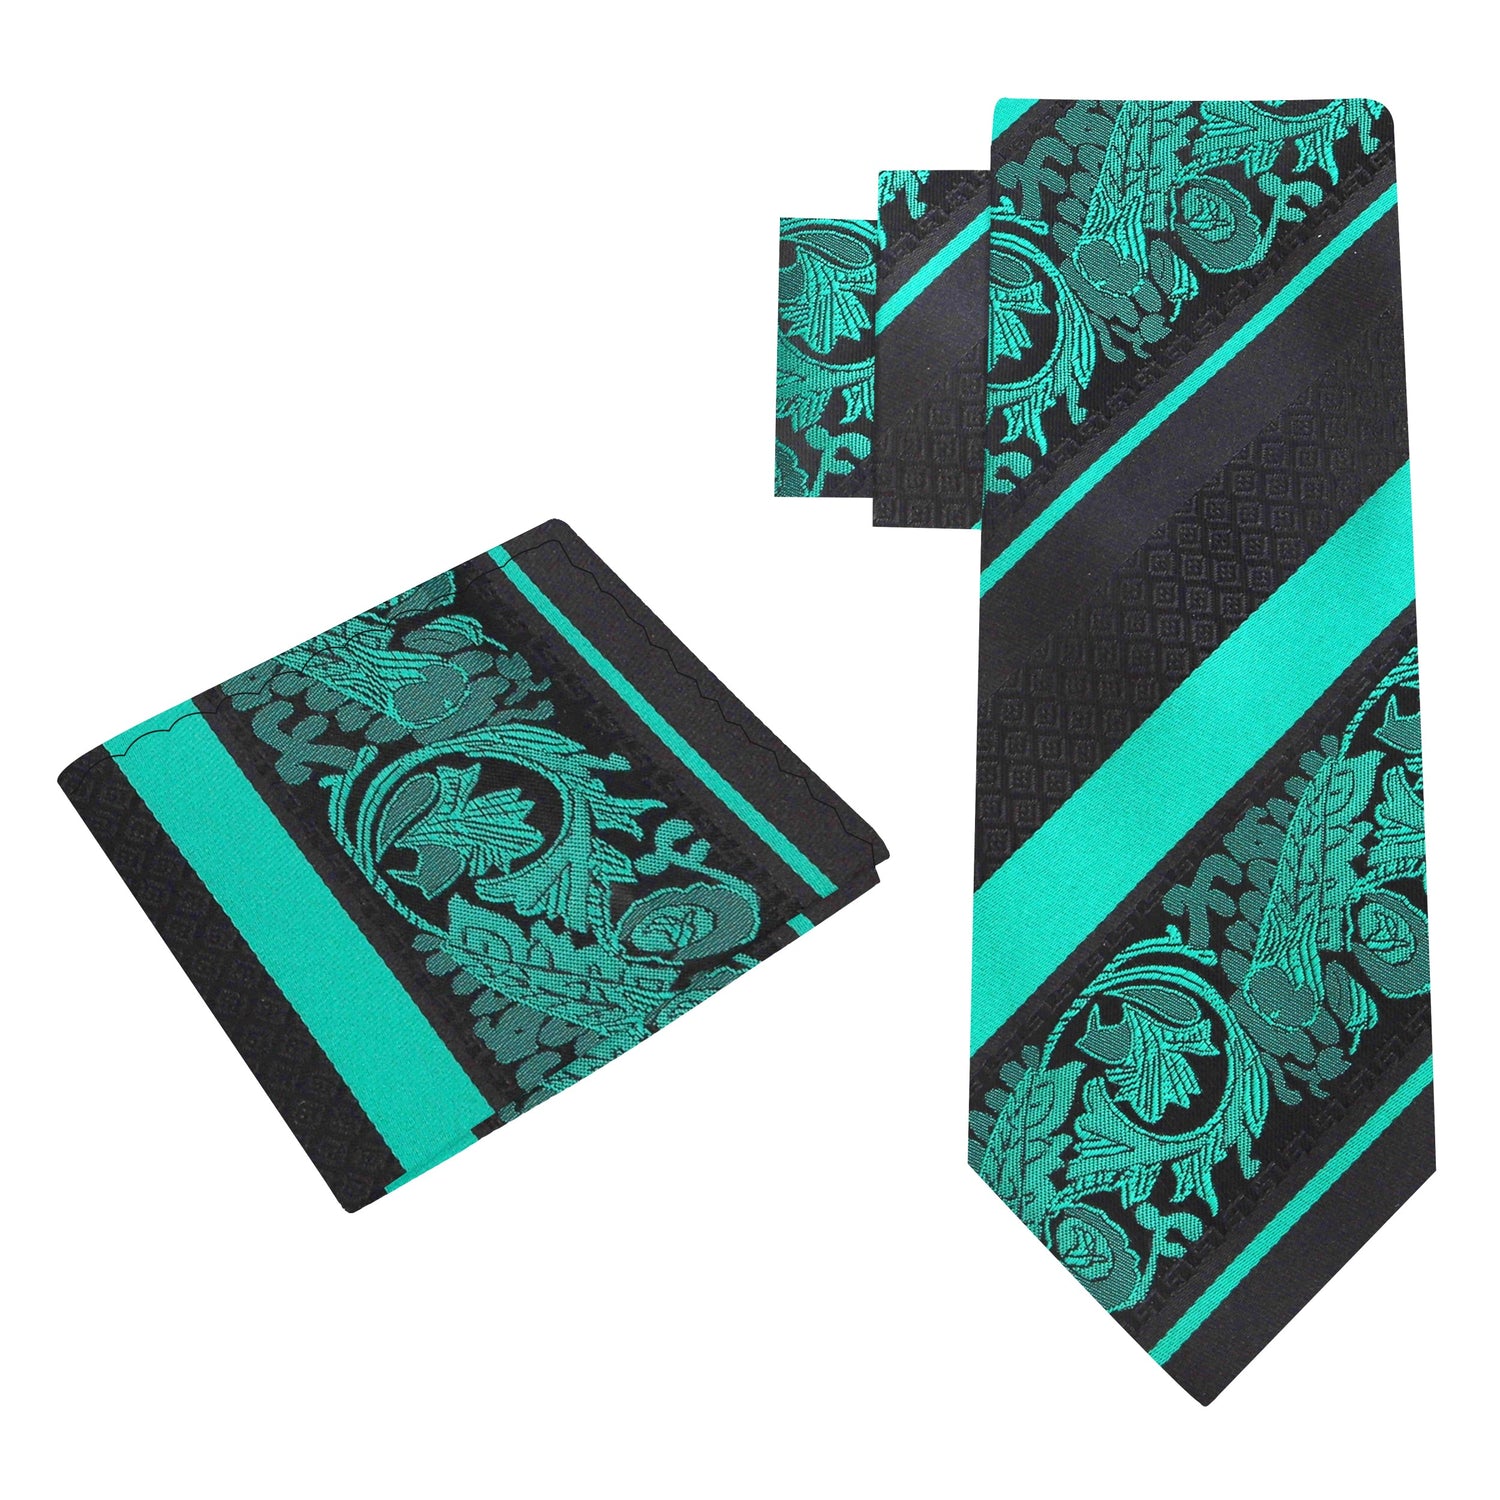 Alt View: Black, Green Floral Tie and Matching Square